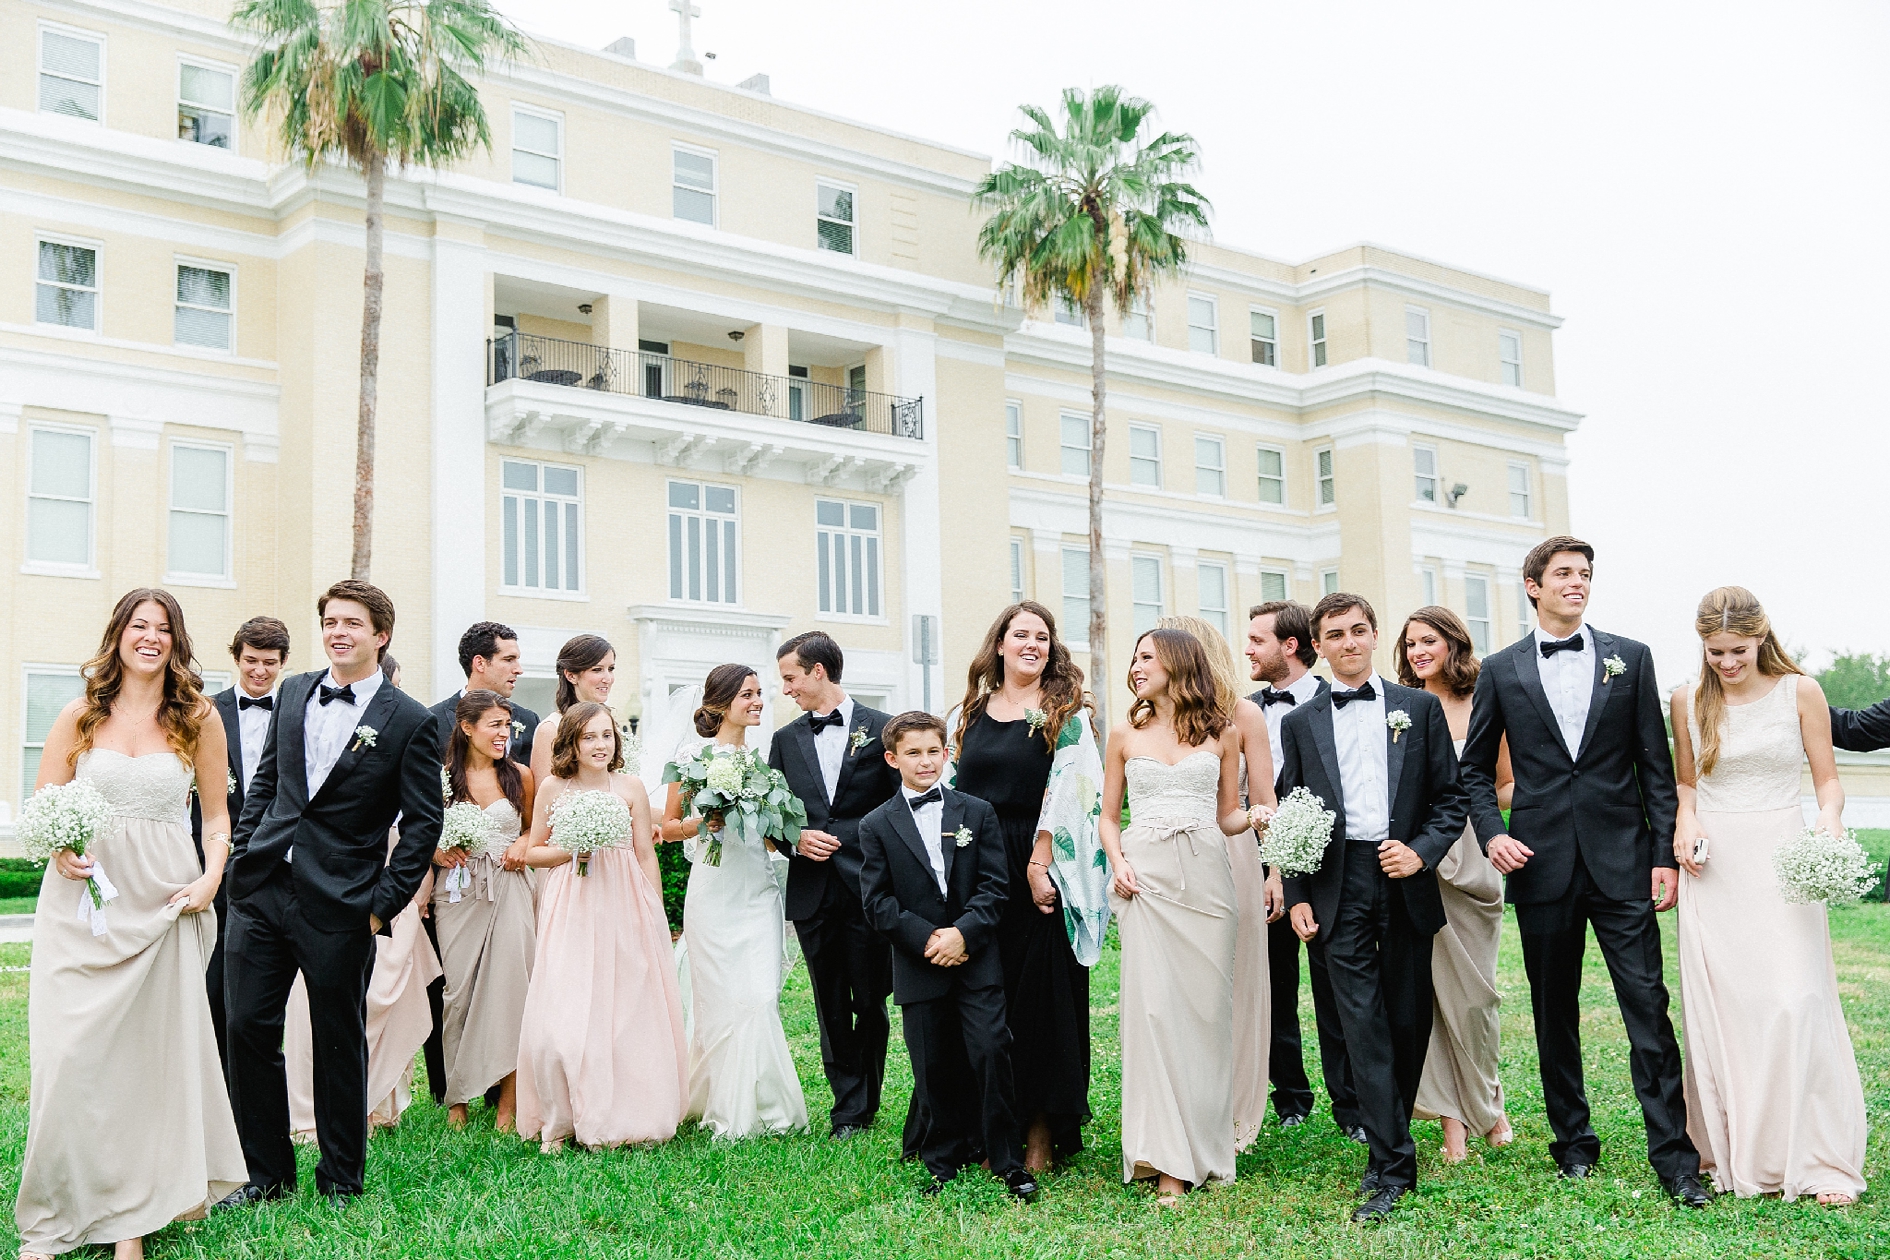 Photo Recipe | Large Bridal Parties | © Ailyn La Torre Photography 2017